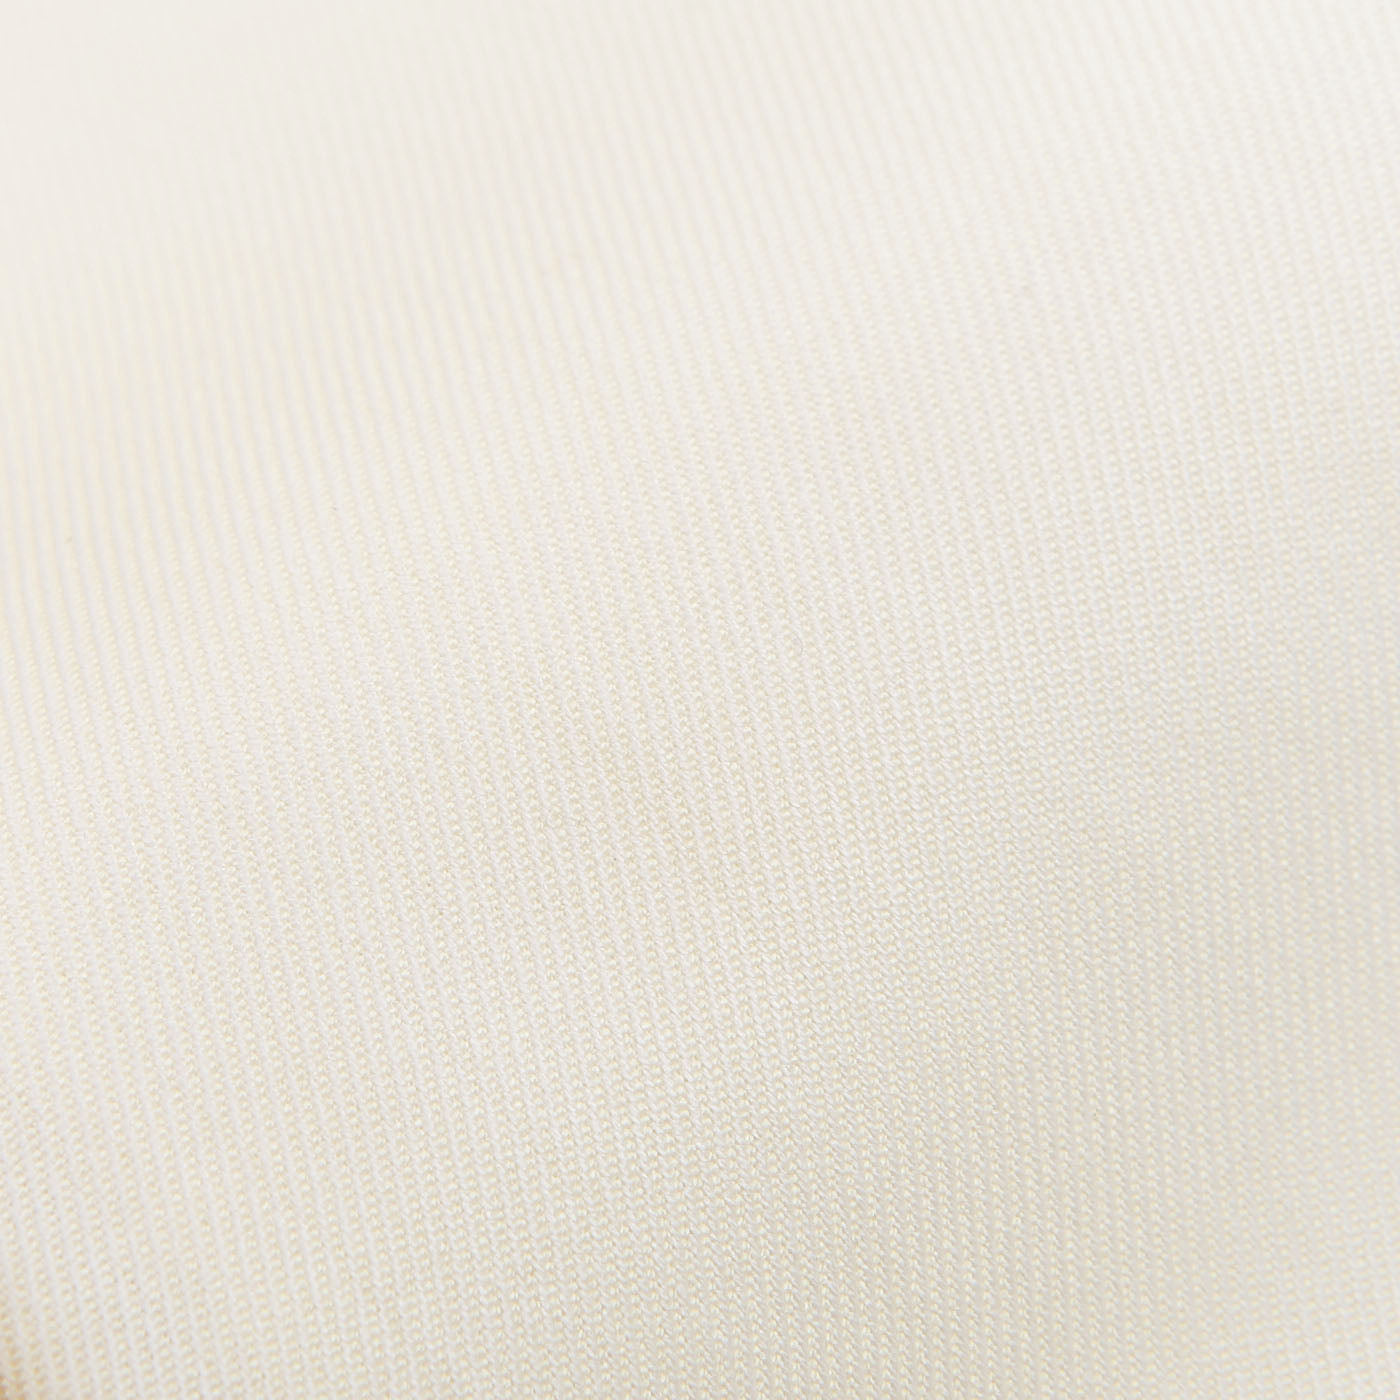 A close up image of an Off White Cotton Twill BD Regular Shirt by Mazzarelli.